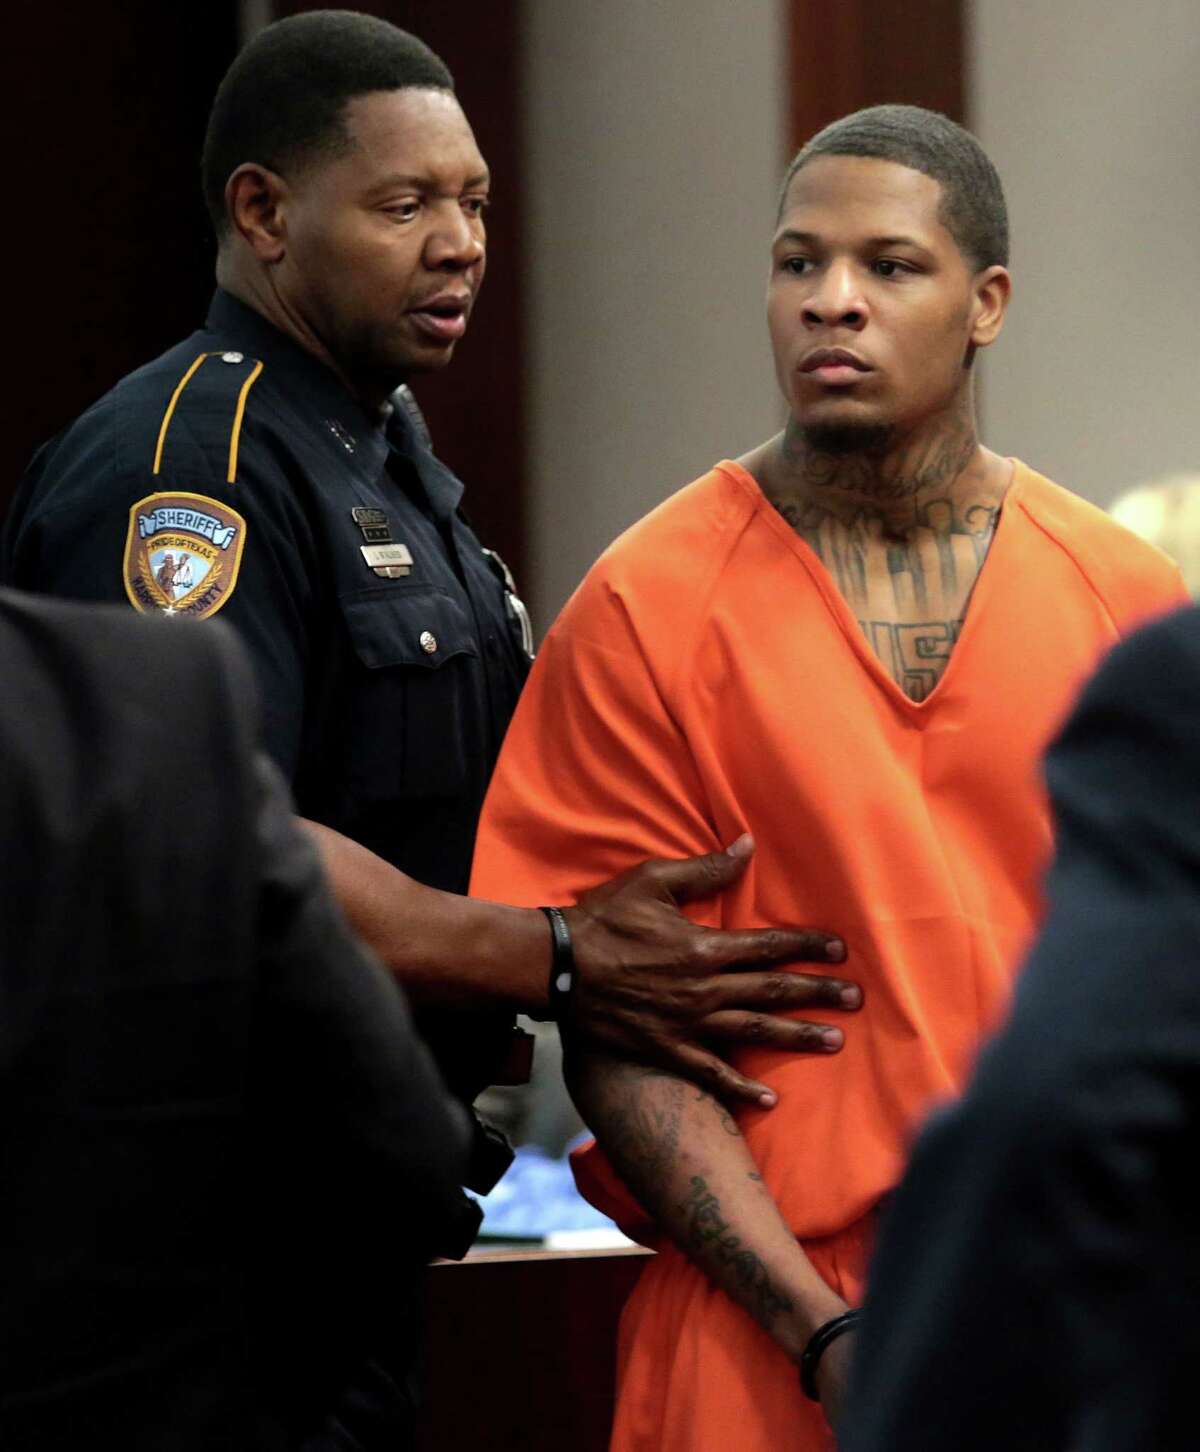 Trey Foster,the man accused in the the Jan. 22, 2013 shooting that left three people wounded at the north Harris County campus of Lone Star Community College was sentenced to 16 years in prison by state District Judge Marc Carter May 13, 2015 at the Harris County Courthouse in Houston Texas. Foster fled the shooting scene and remained at large for several days until investigators with the Gulf Coast Violent Offenders Task Force tracked him down to a Dallas suburb. (Billy Smith II / Houston Chronicle)